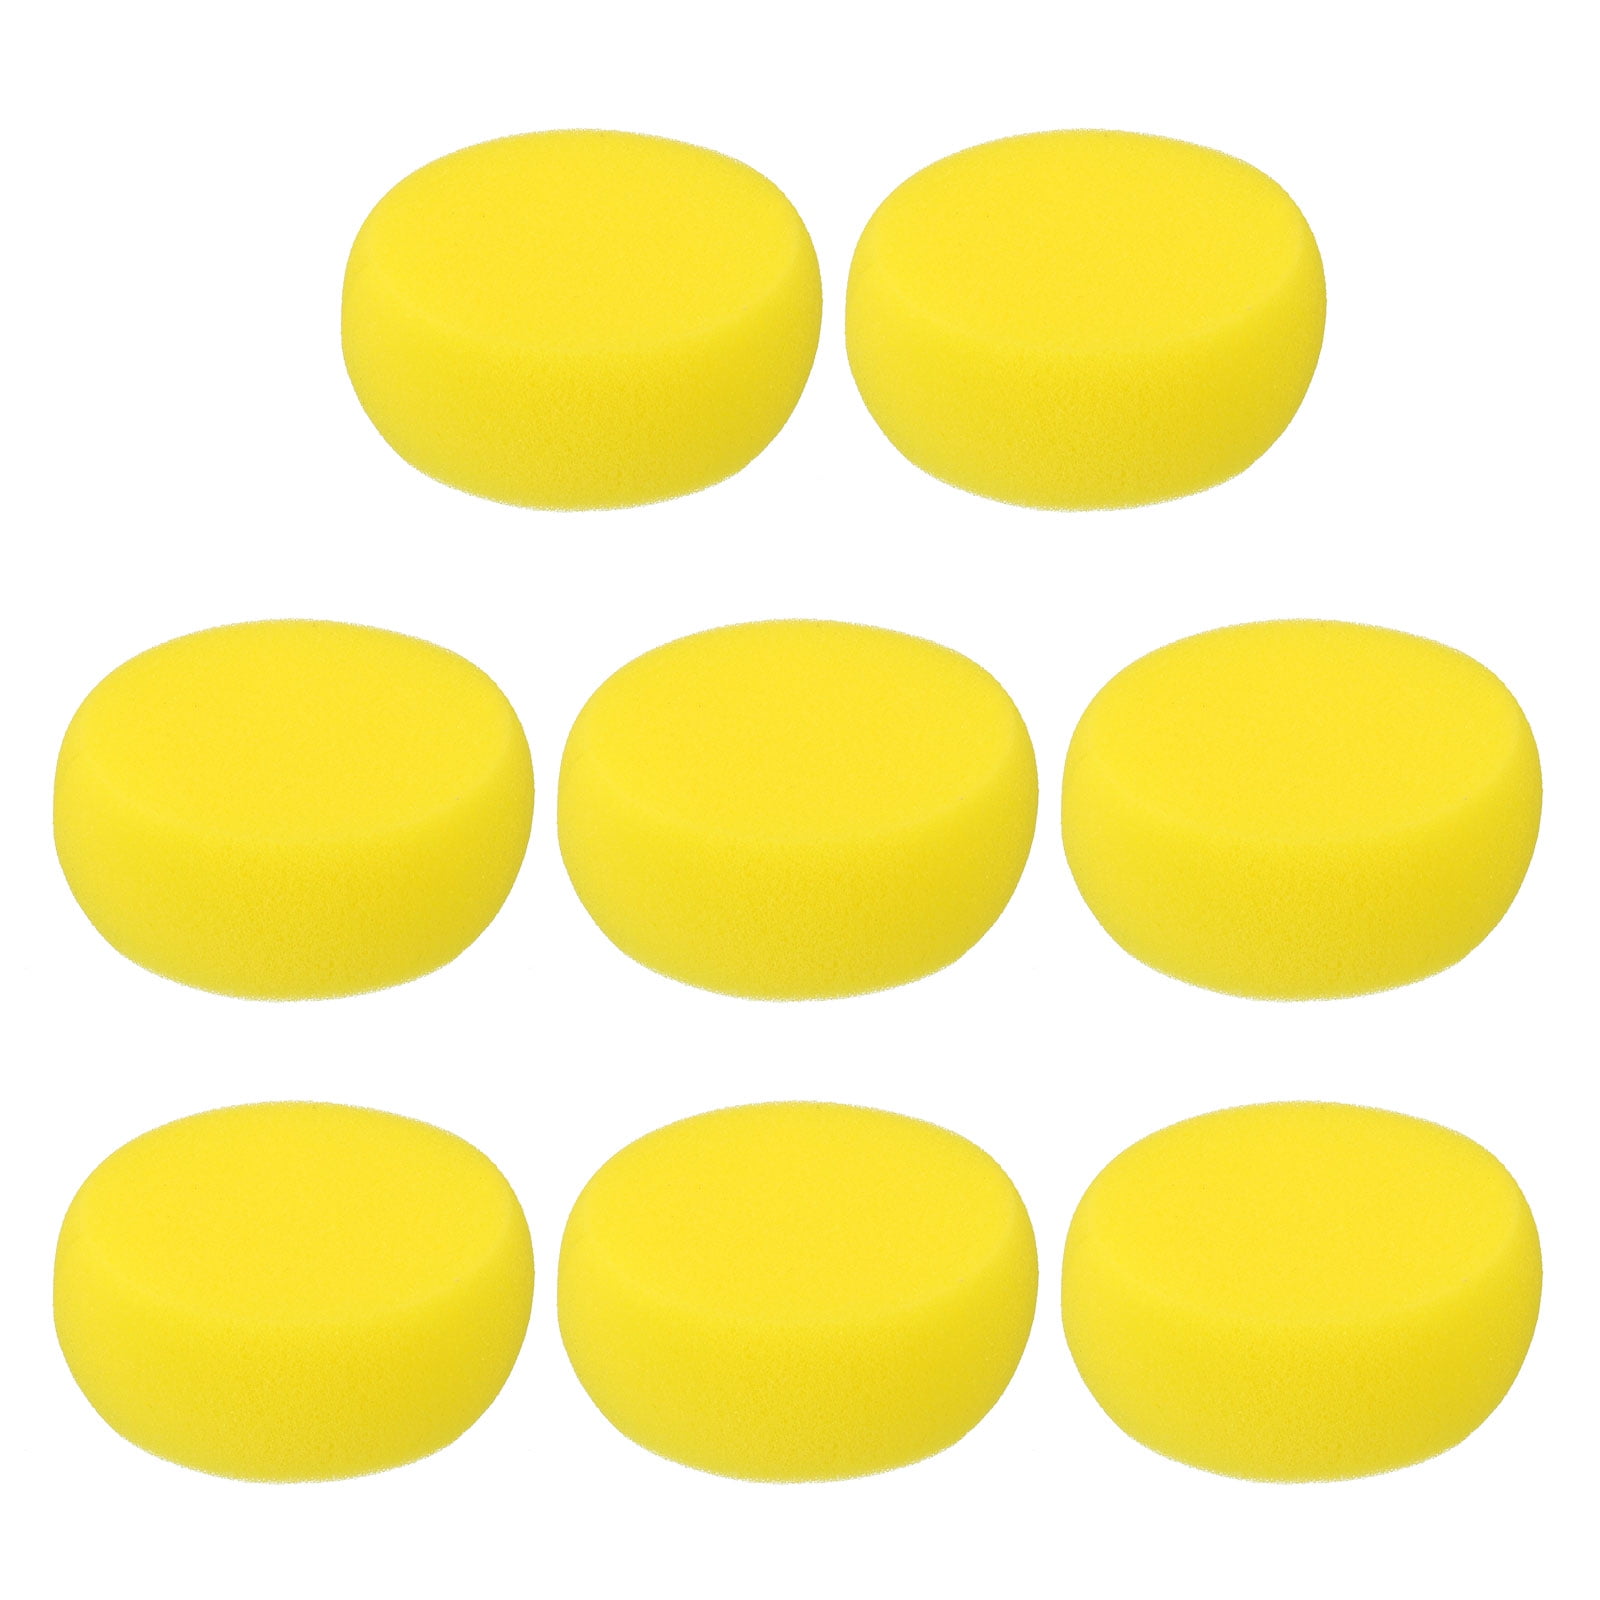 Uxcell 1.2 Paint Sponges for Painting, 40 Pack Round Painting Sponge Foam  Brush Wooden Handle, Yellow